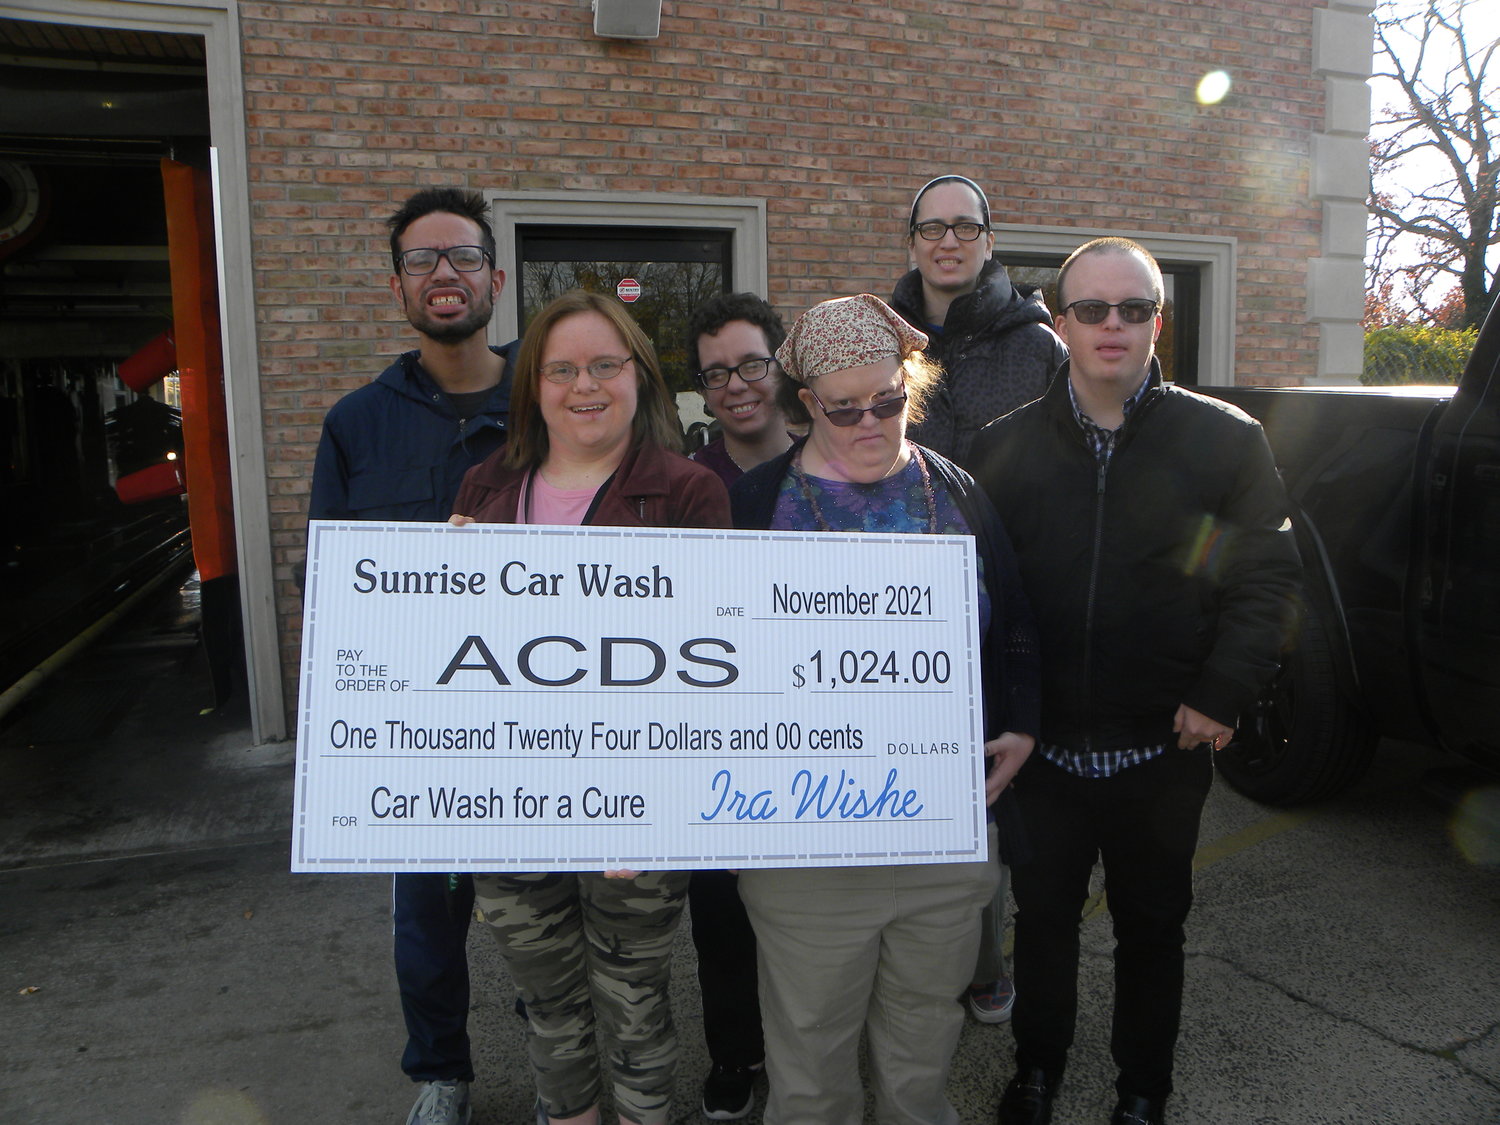 ACDS attendees with the ceremonial check at the Sunrise Car Wash. ACDS has a day habilitation center and numerous group homes in Merrick.